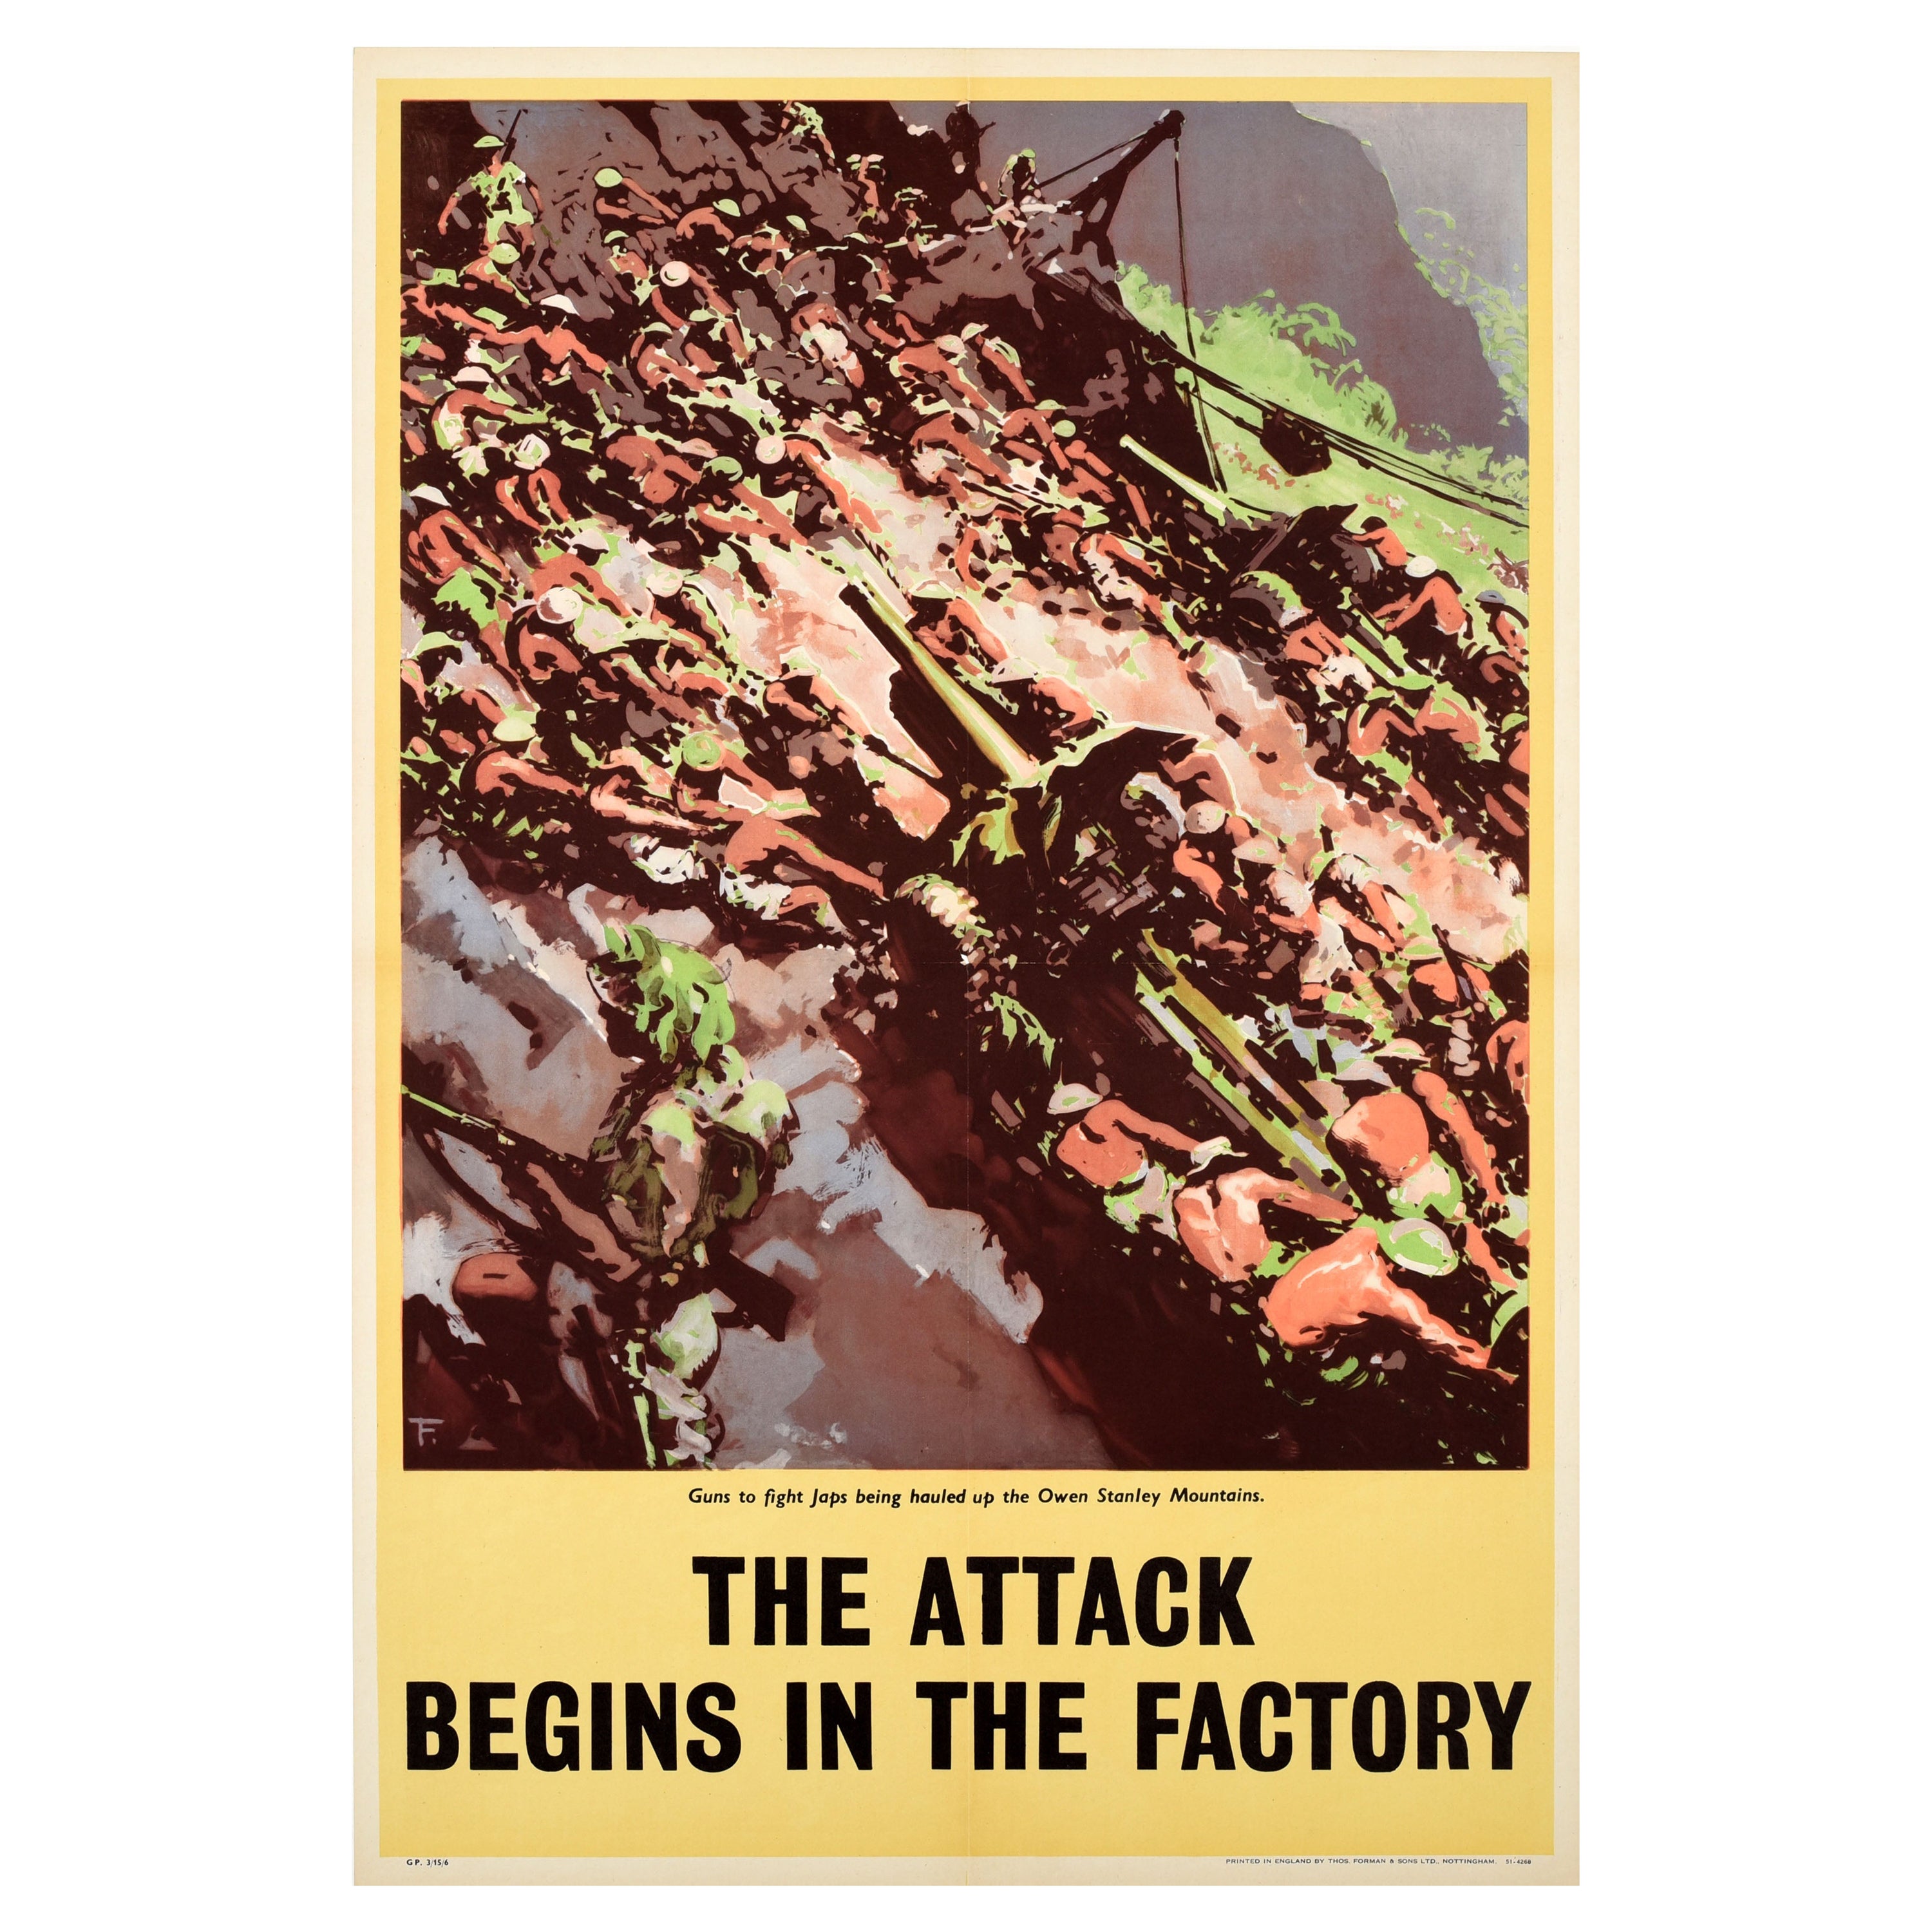 Original Vintage WWII Poster Attack Factory Owen Stanley Mountains Pacific War For Sale